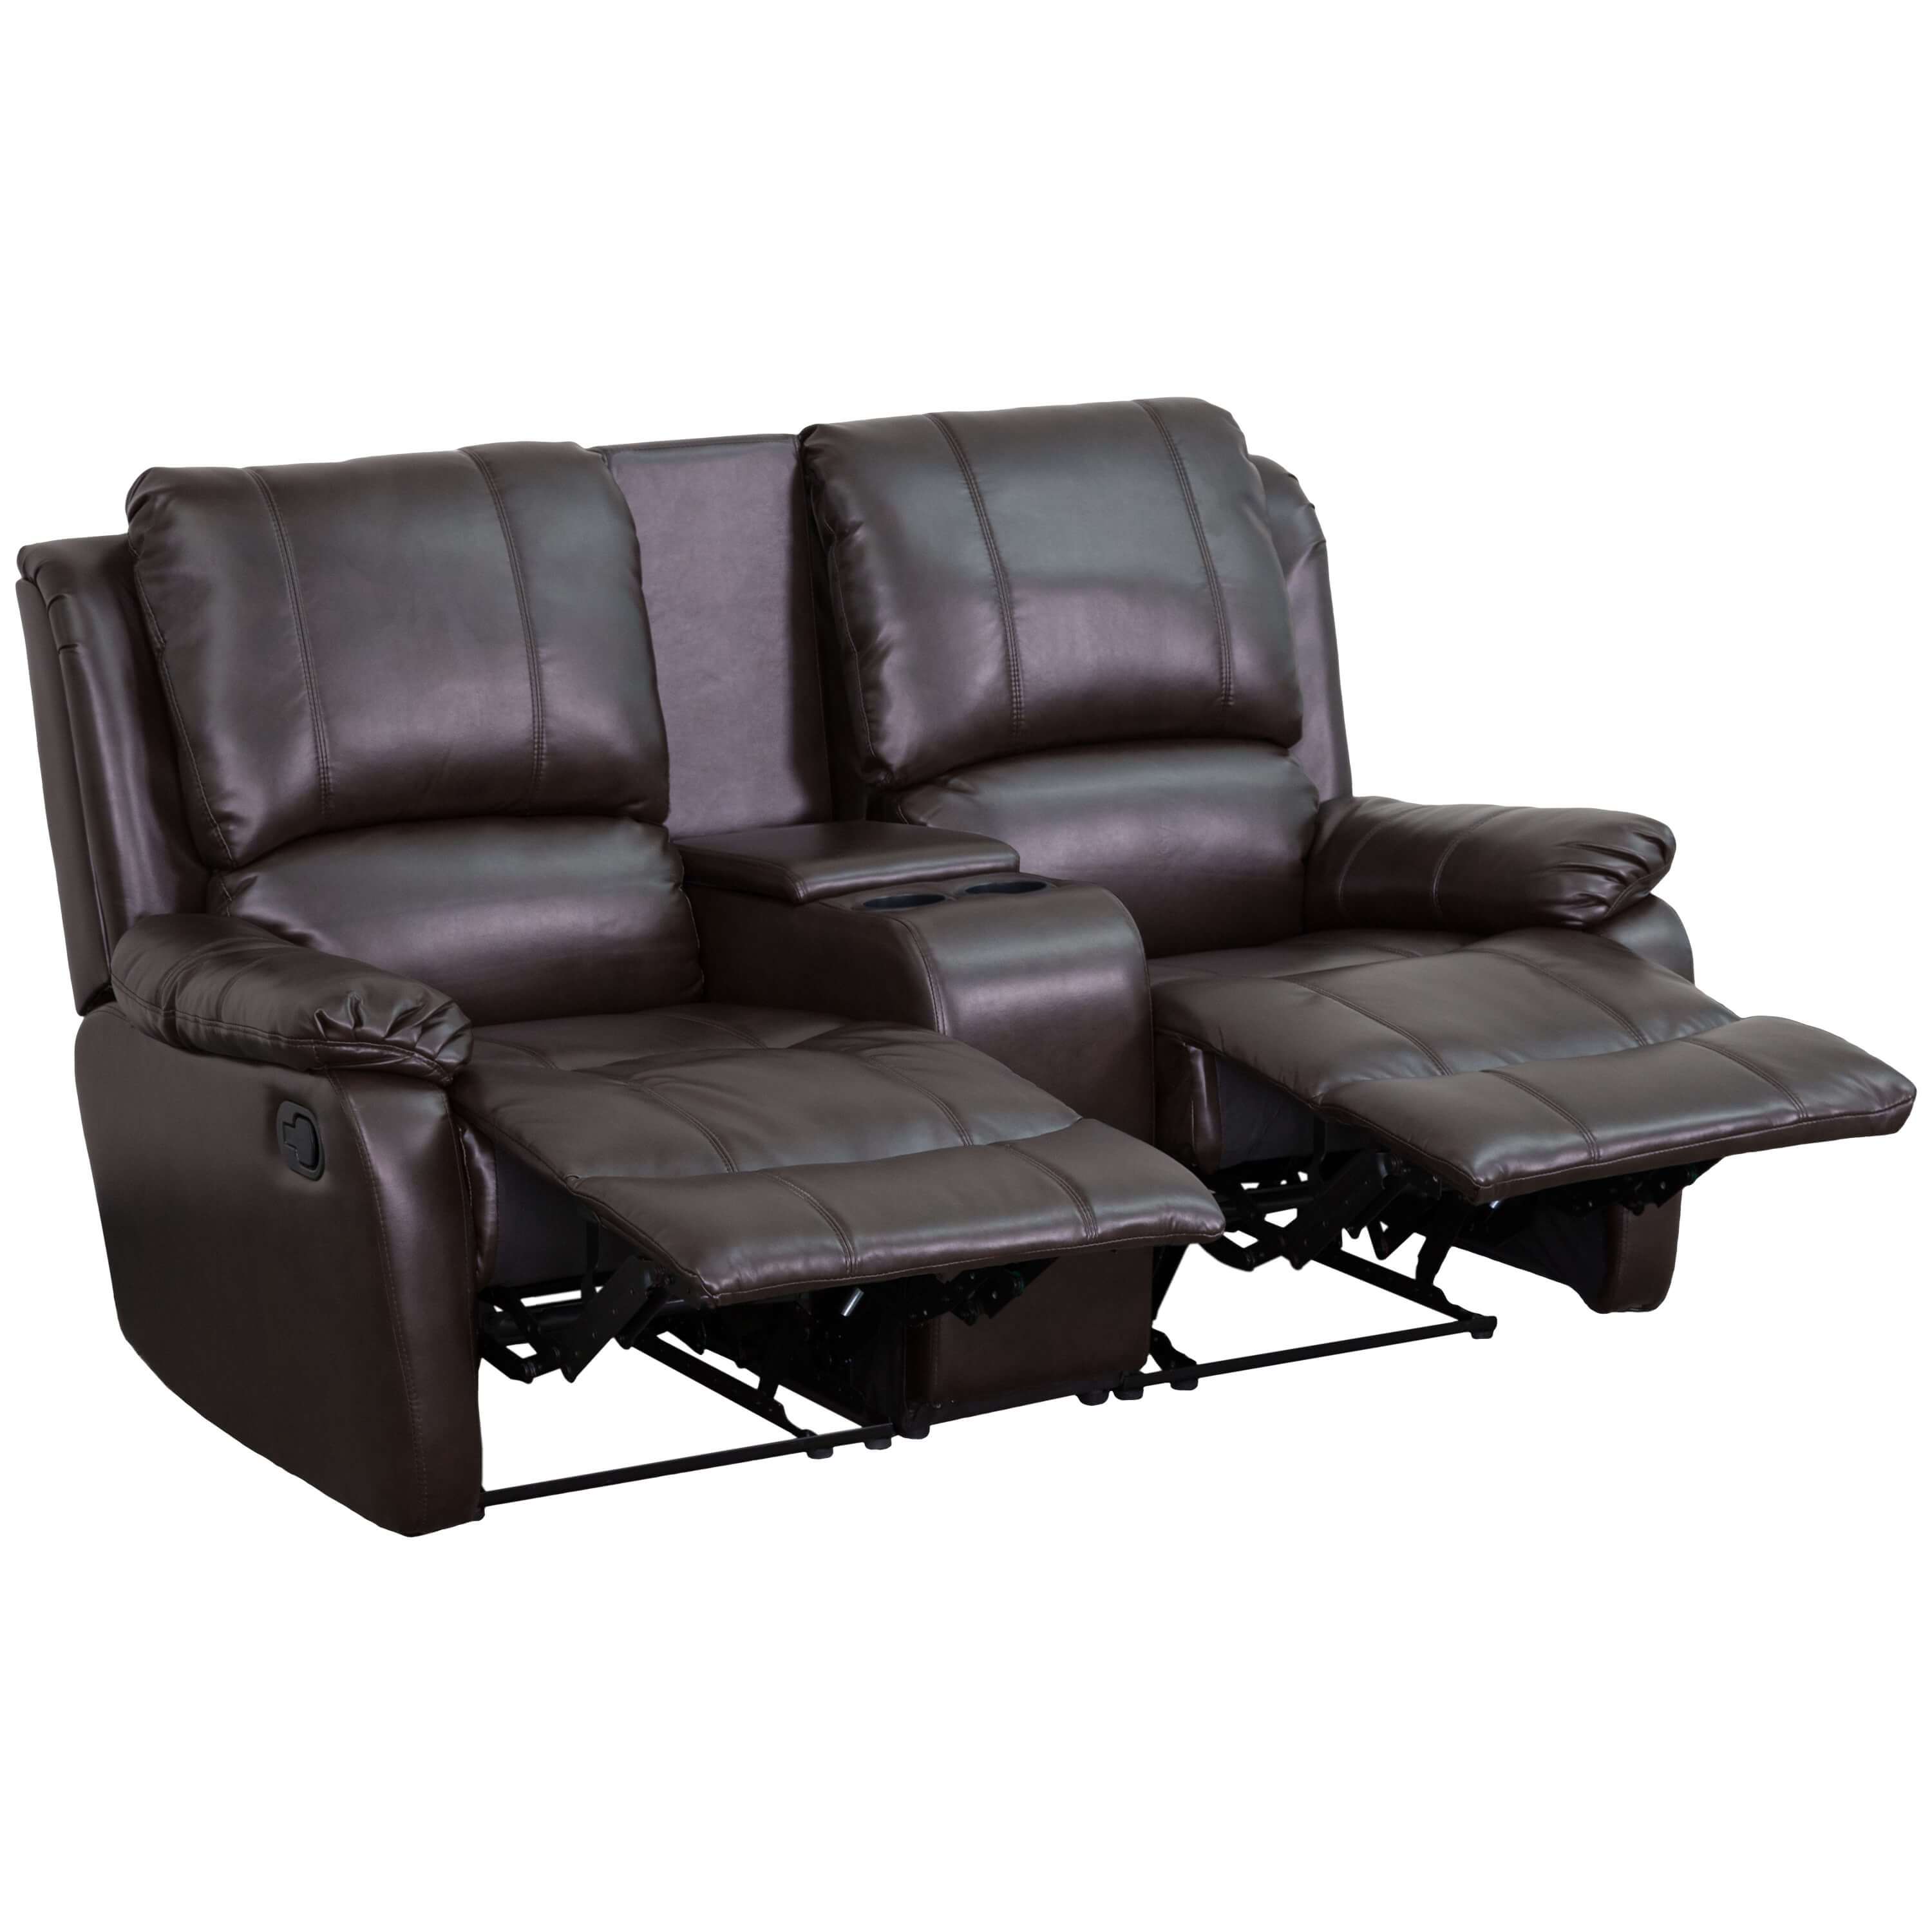 Recliner chair with cup holder reclined view